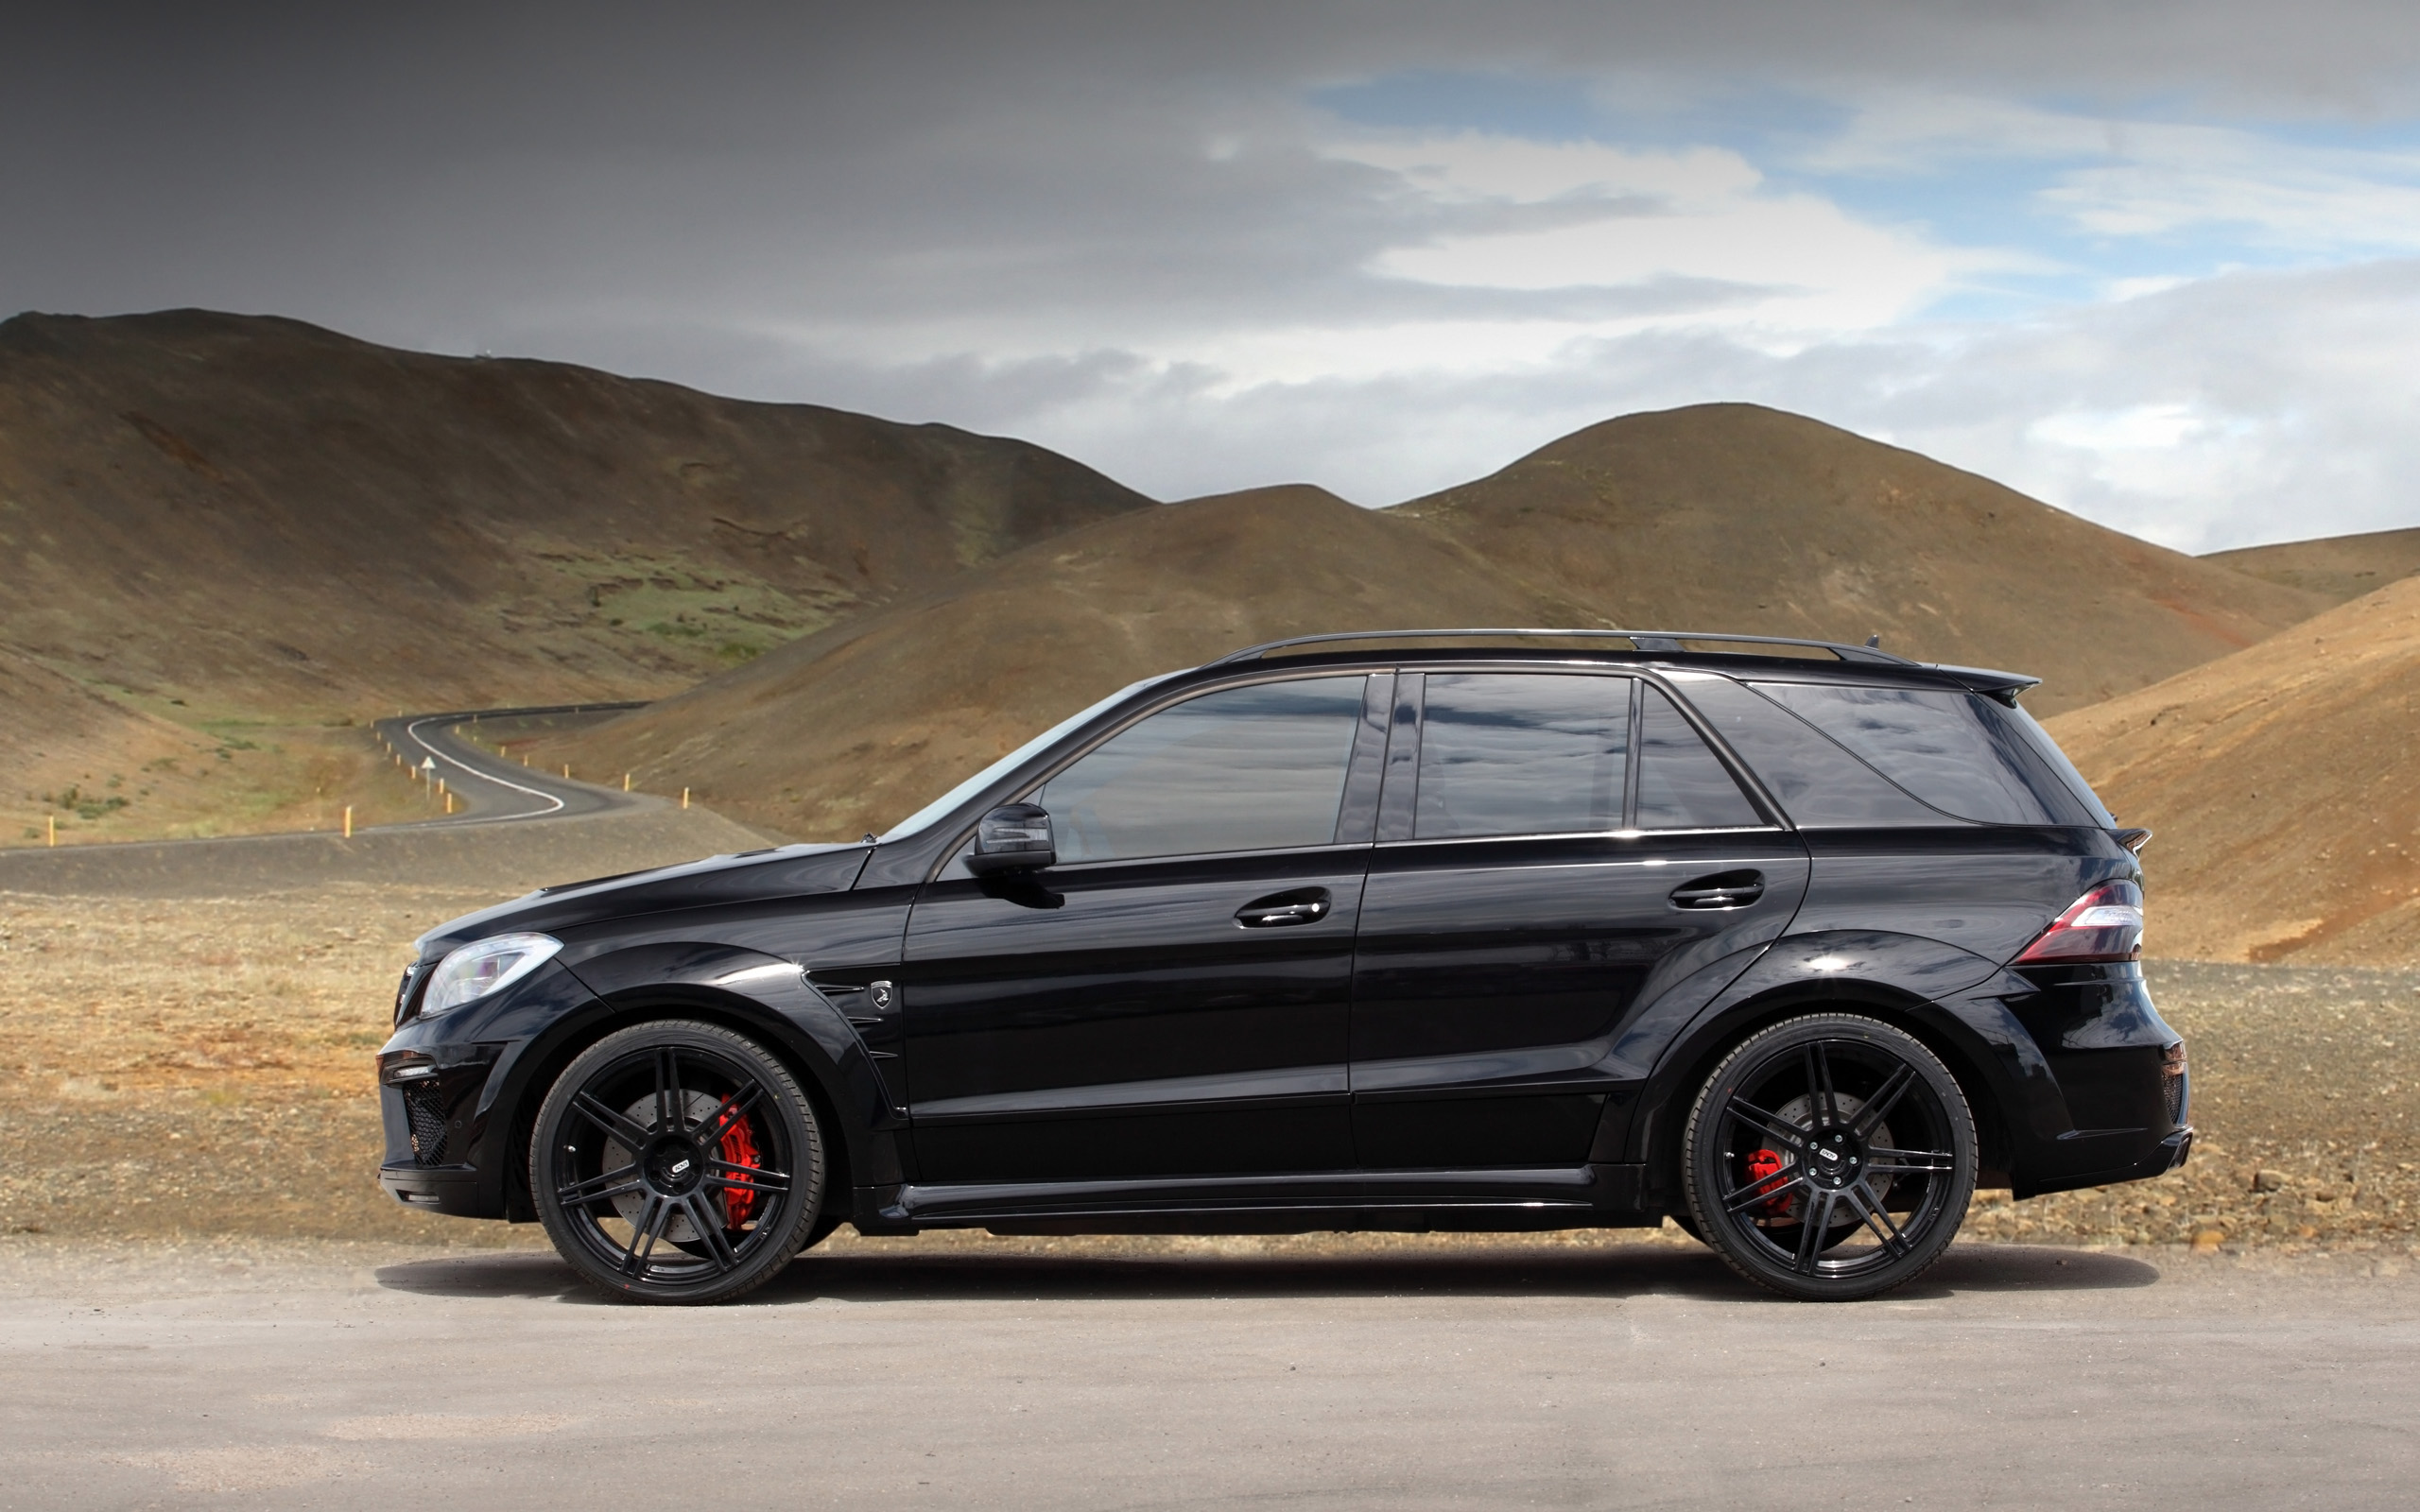 Mercedes-Benz Ml63 Amg Wallpapers